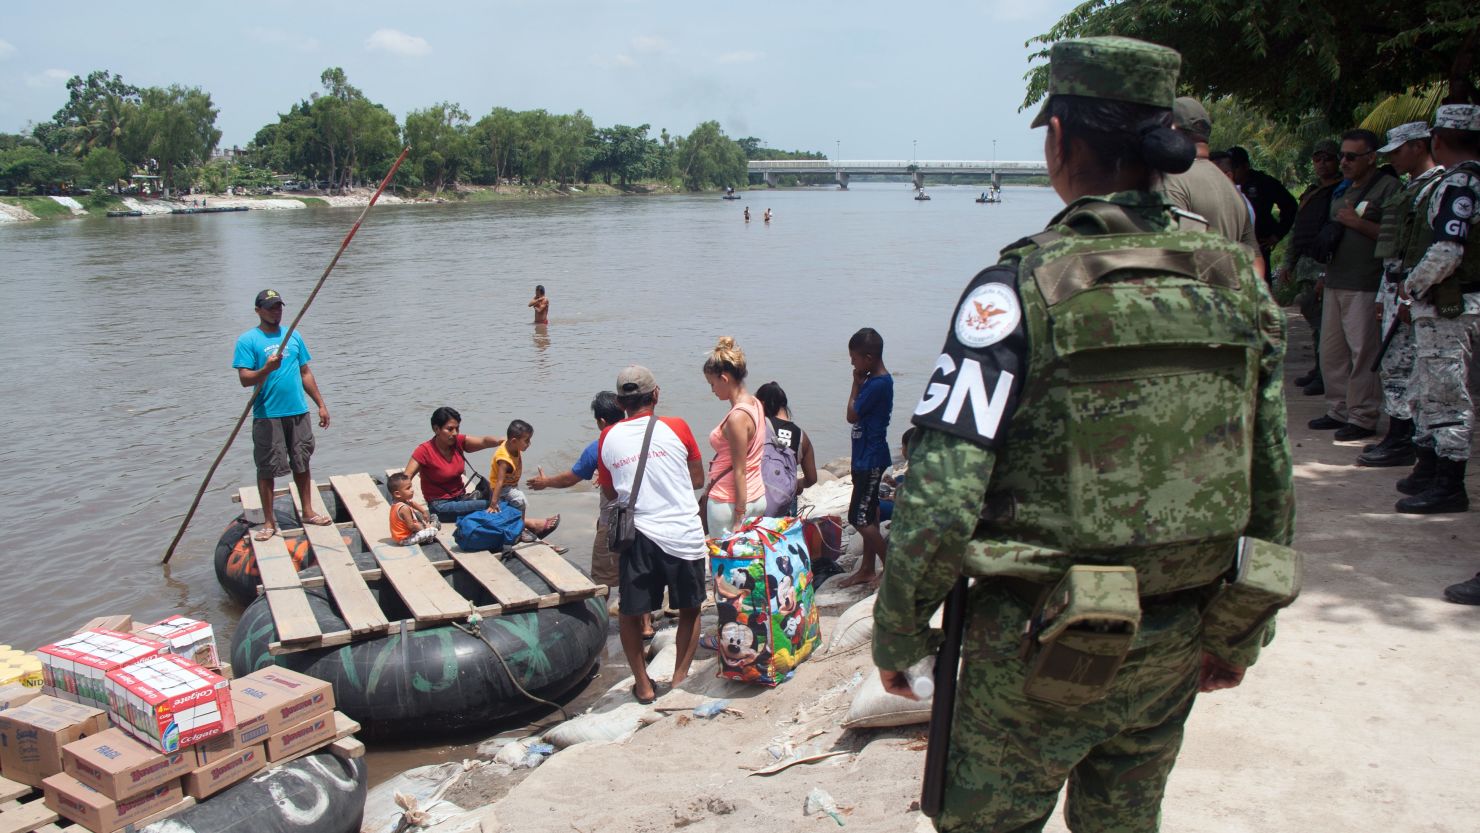 National guard members stand guard along the banks of the Suchiate river in Ciudad Hidalgo, Chiapas State, Mexico, on July 3, 2019. (Photo by STR / AFP)   